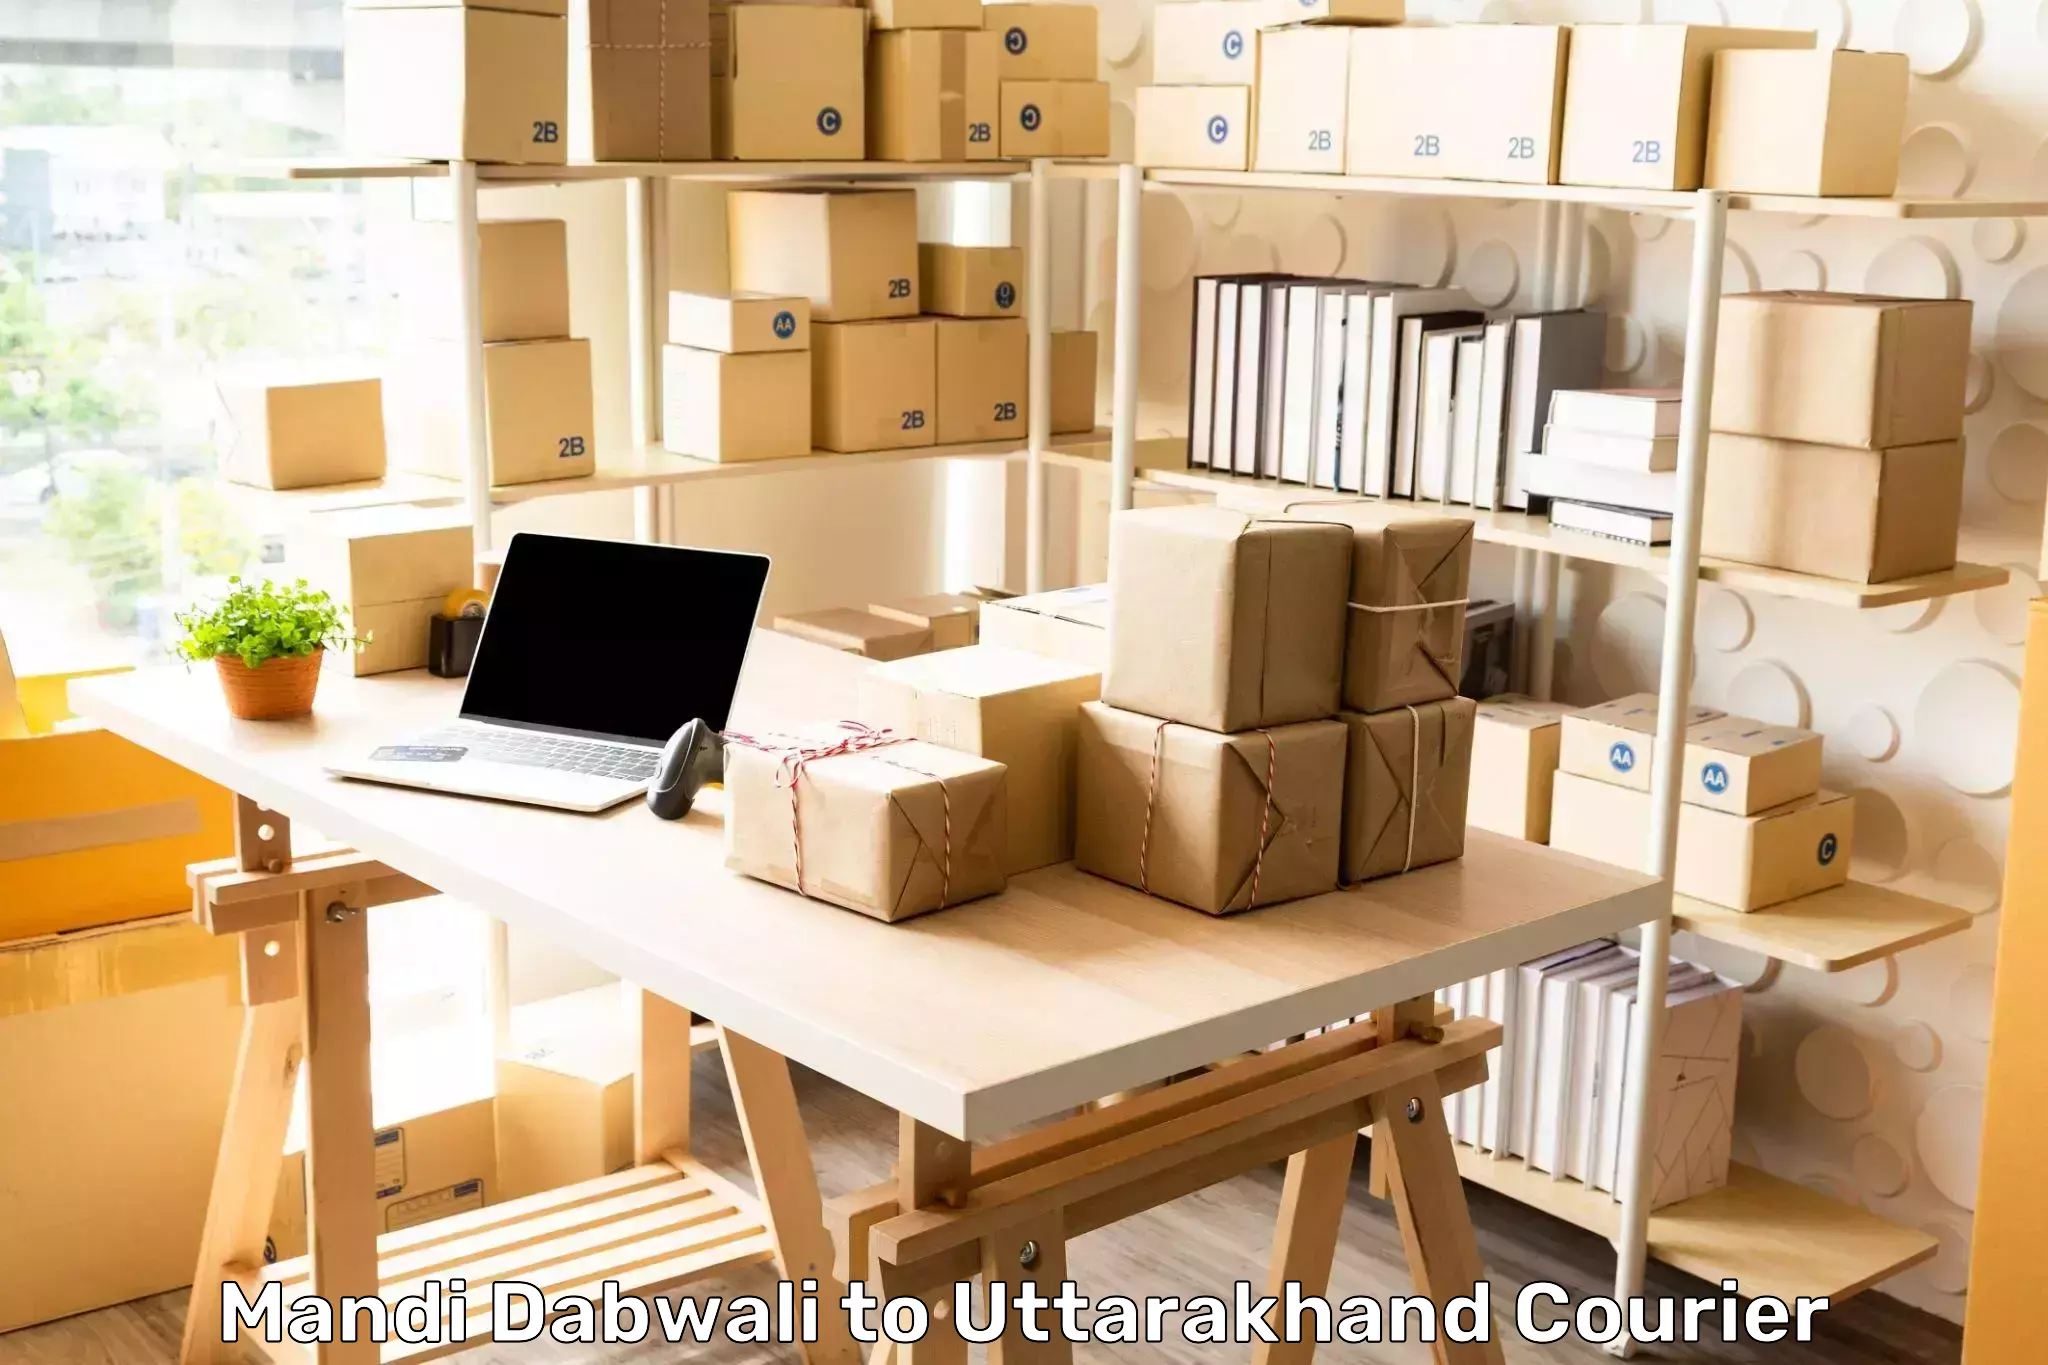 State-of-the-art courier technology Mandi Dabwali to Gumkhal